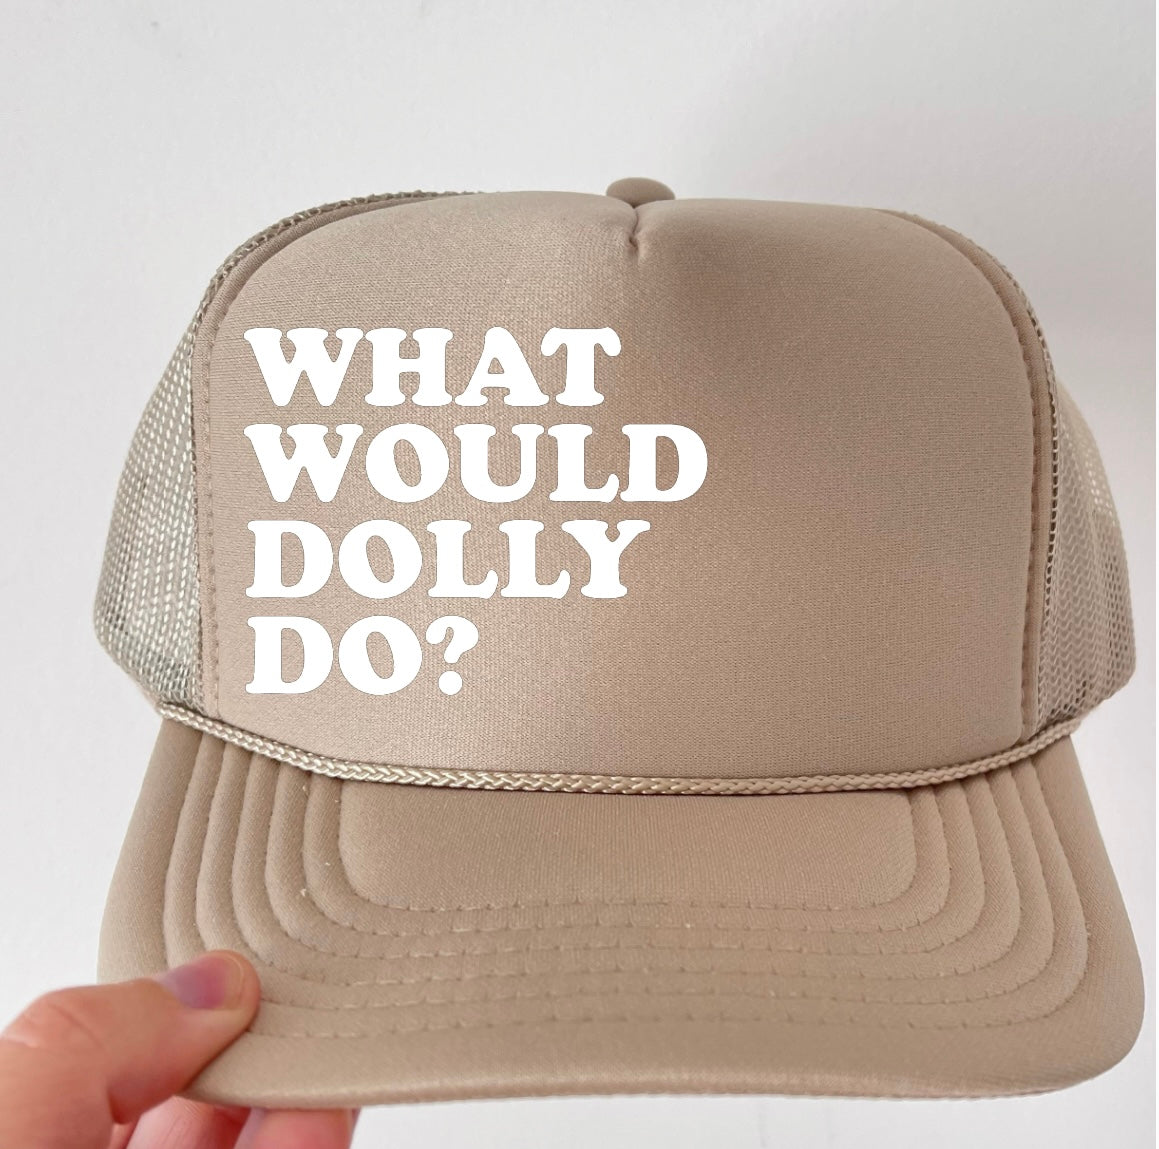 WHAT WOULD DOLLY DO?